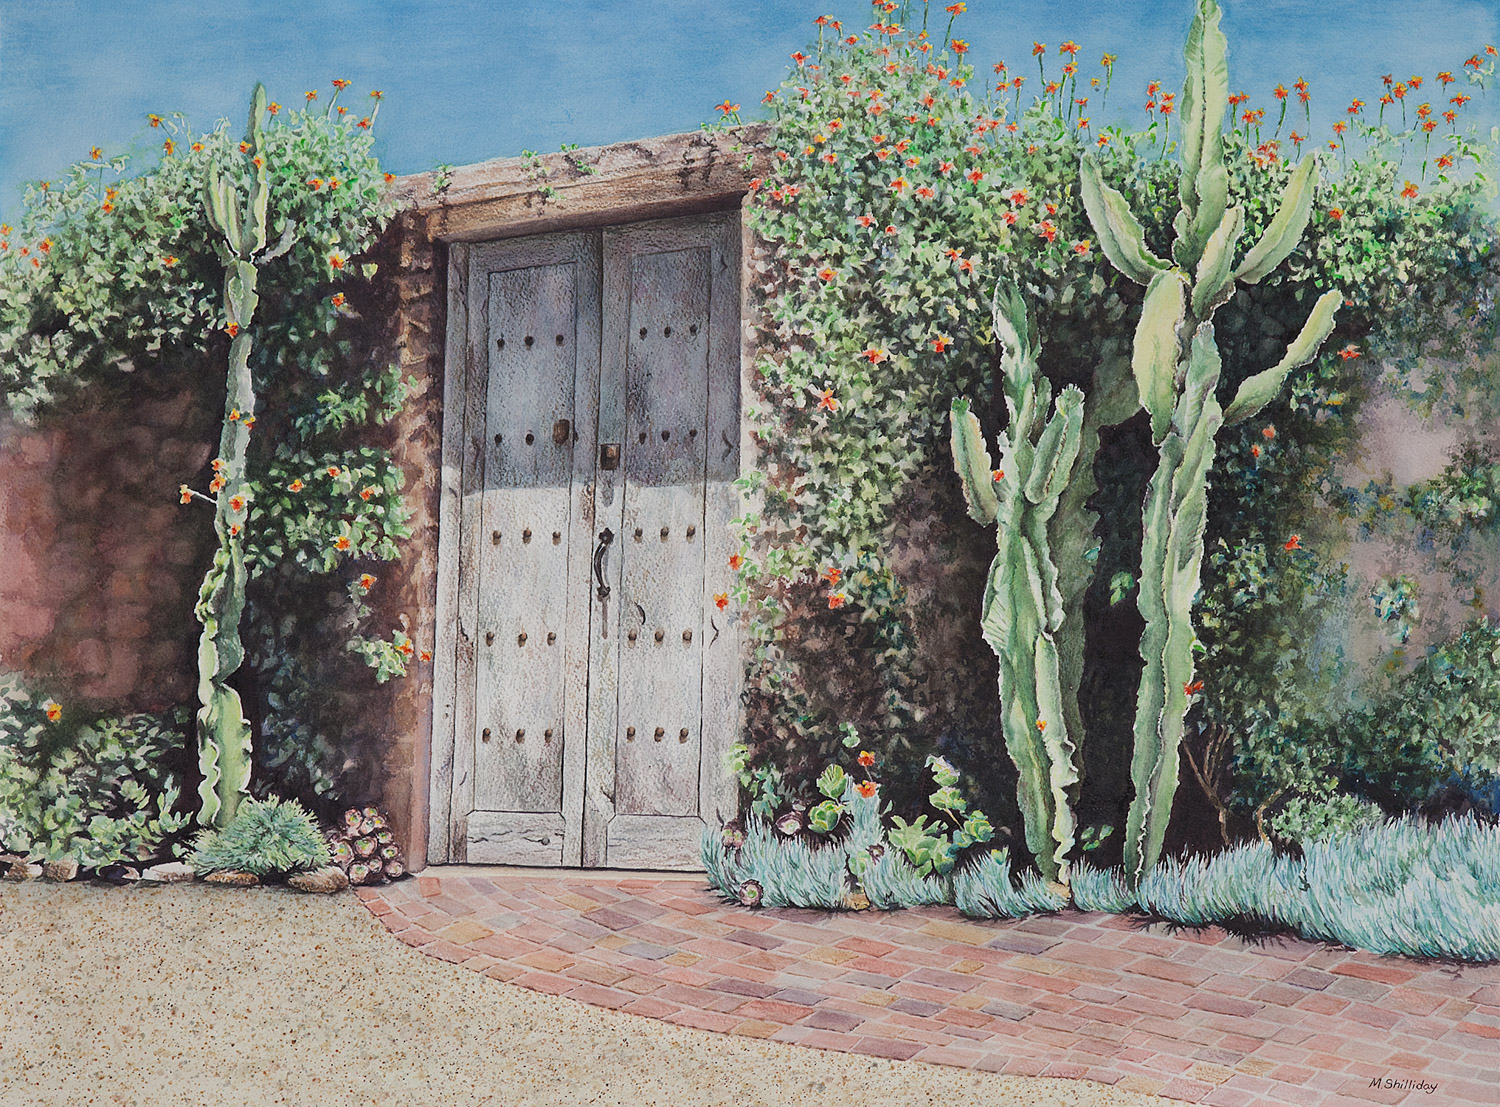 Watercolor by Martha Shilliday of a Southwestern style doorway.